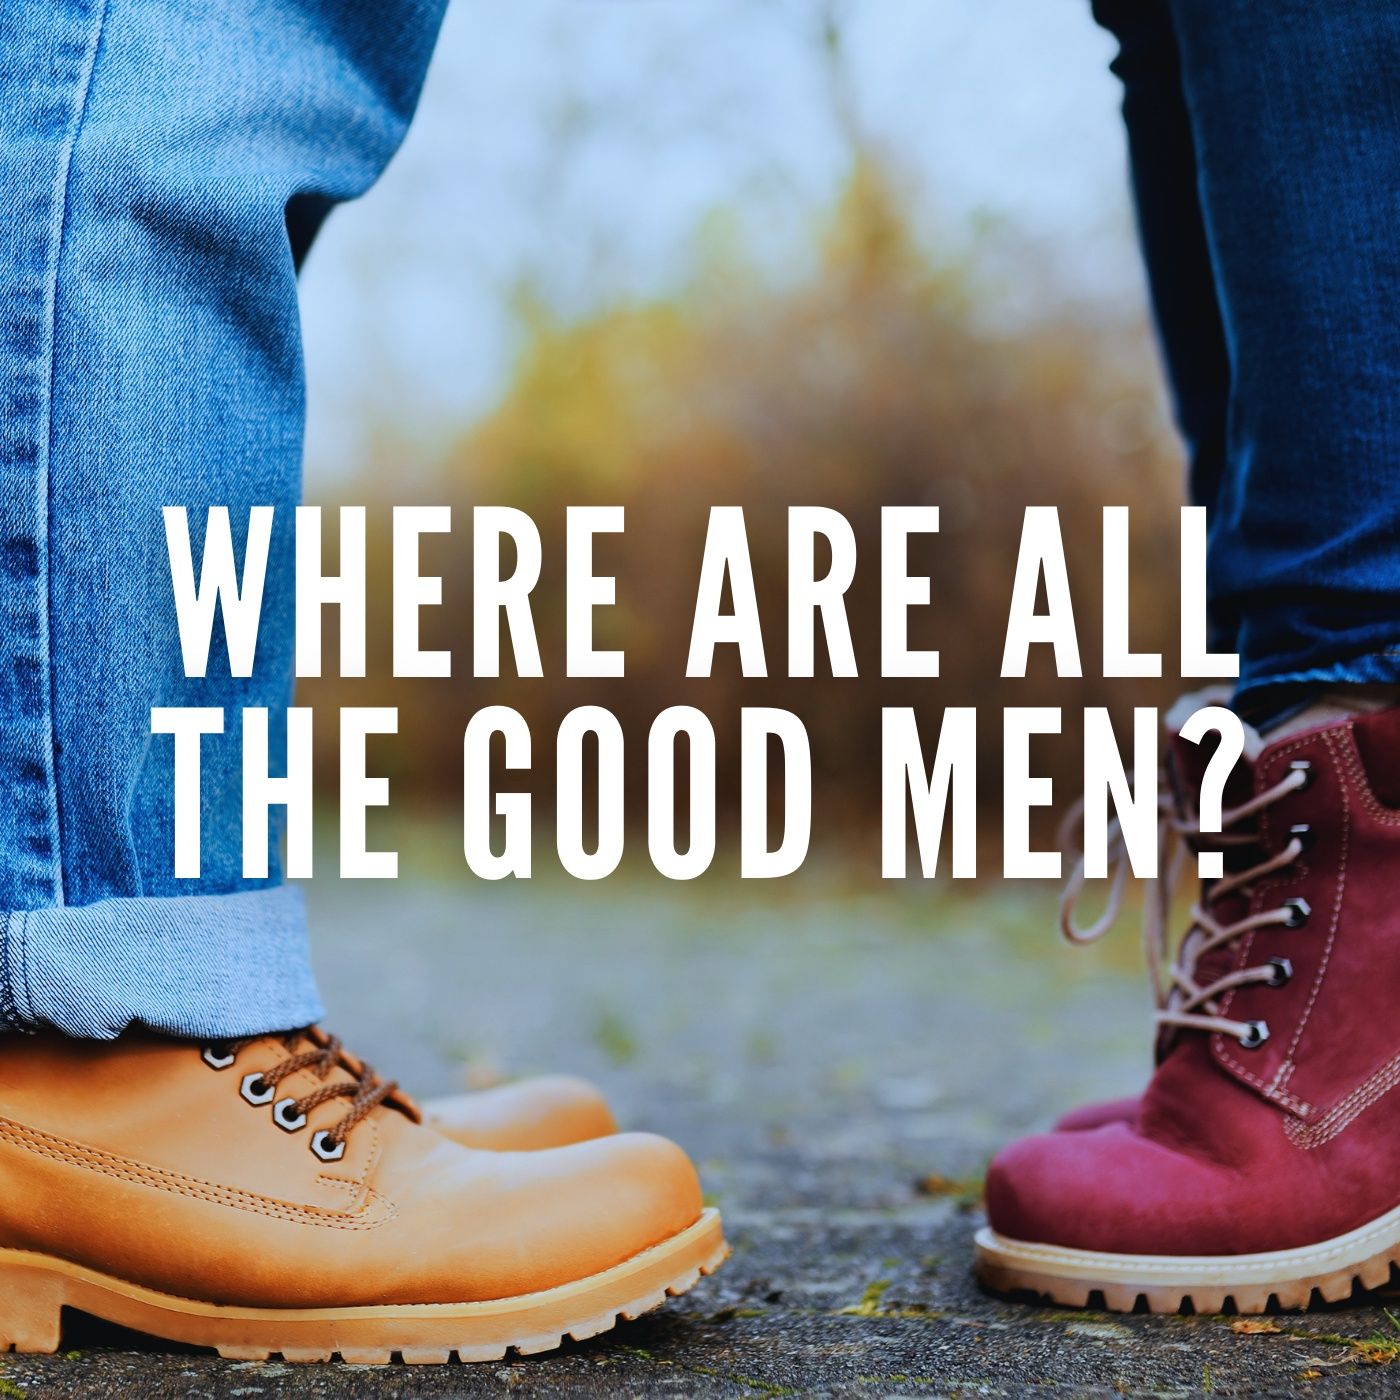 Where Are All the Good Men?